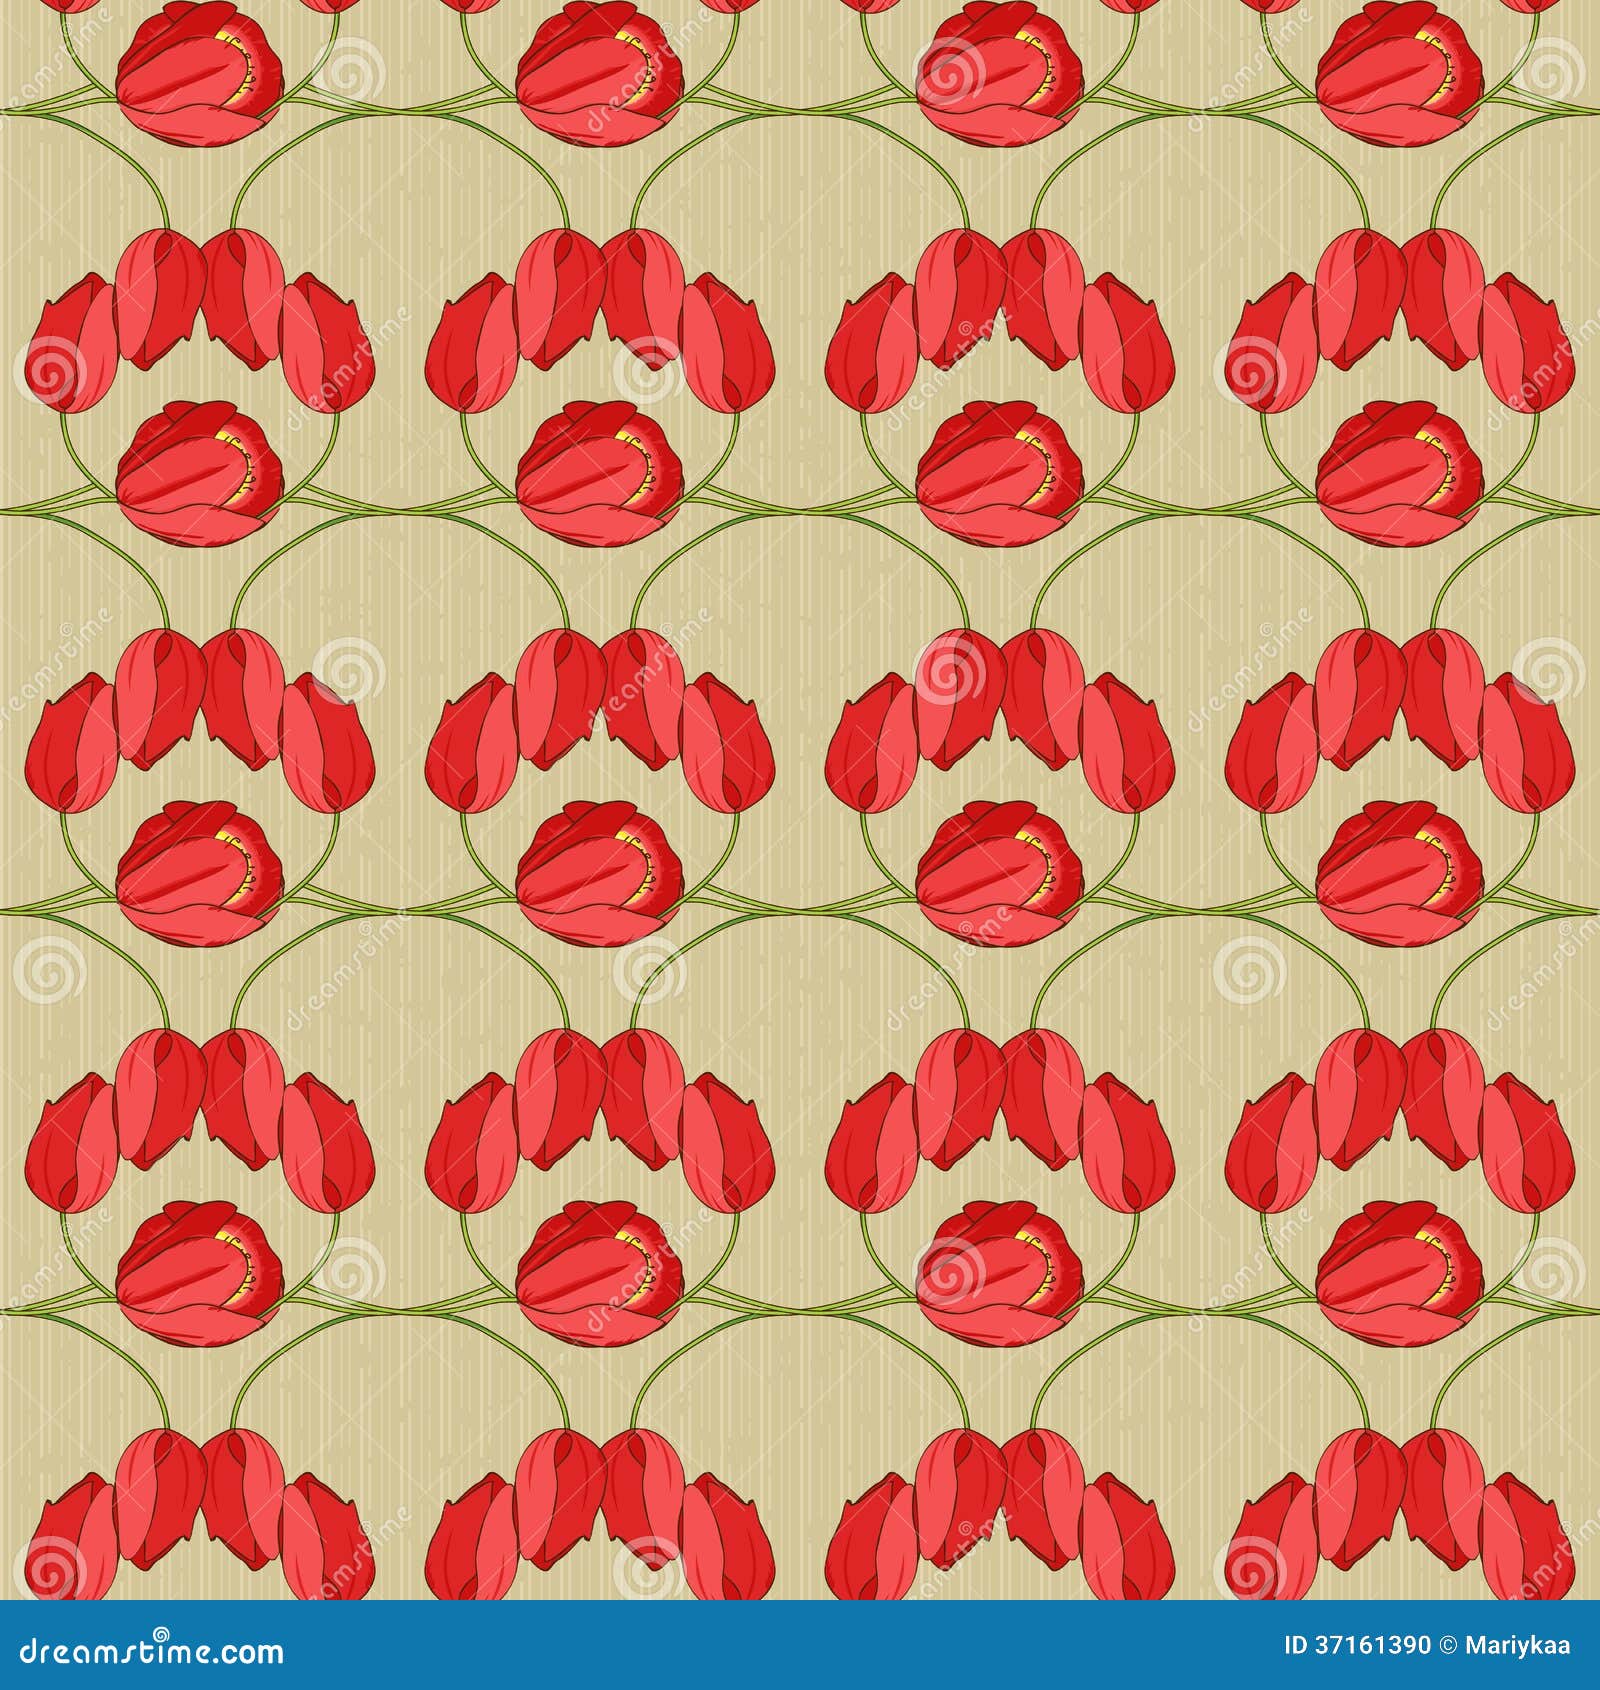 Vector seamless pattern with tulips. Seamless vector pattern with red tulips